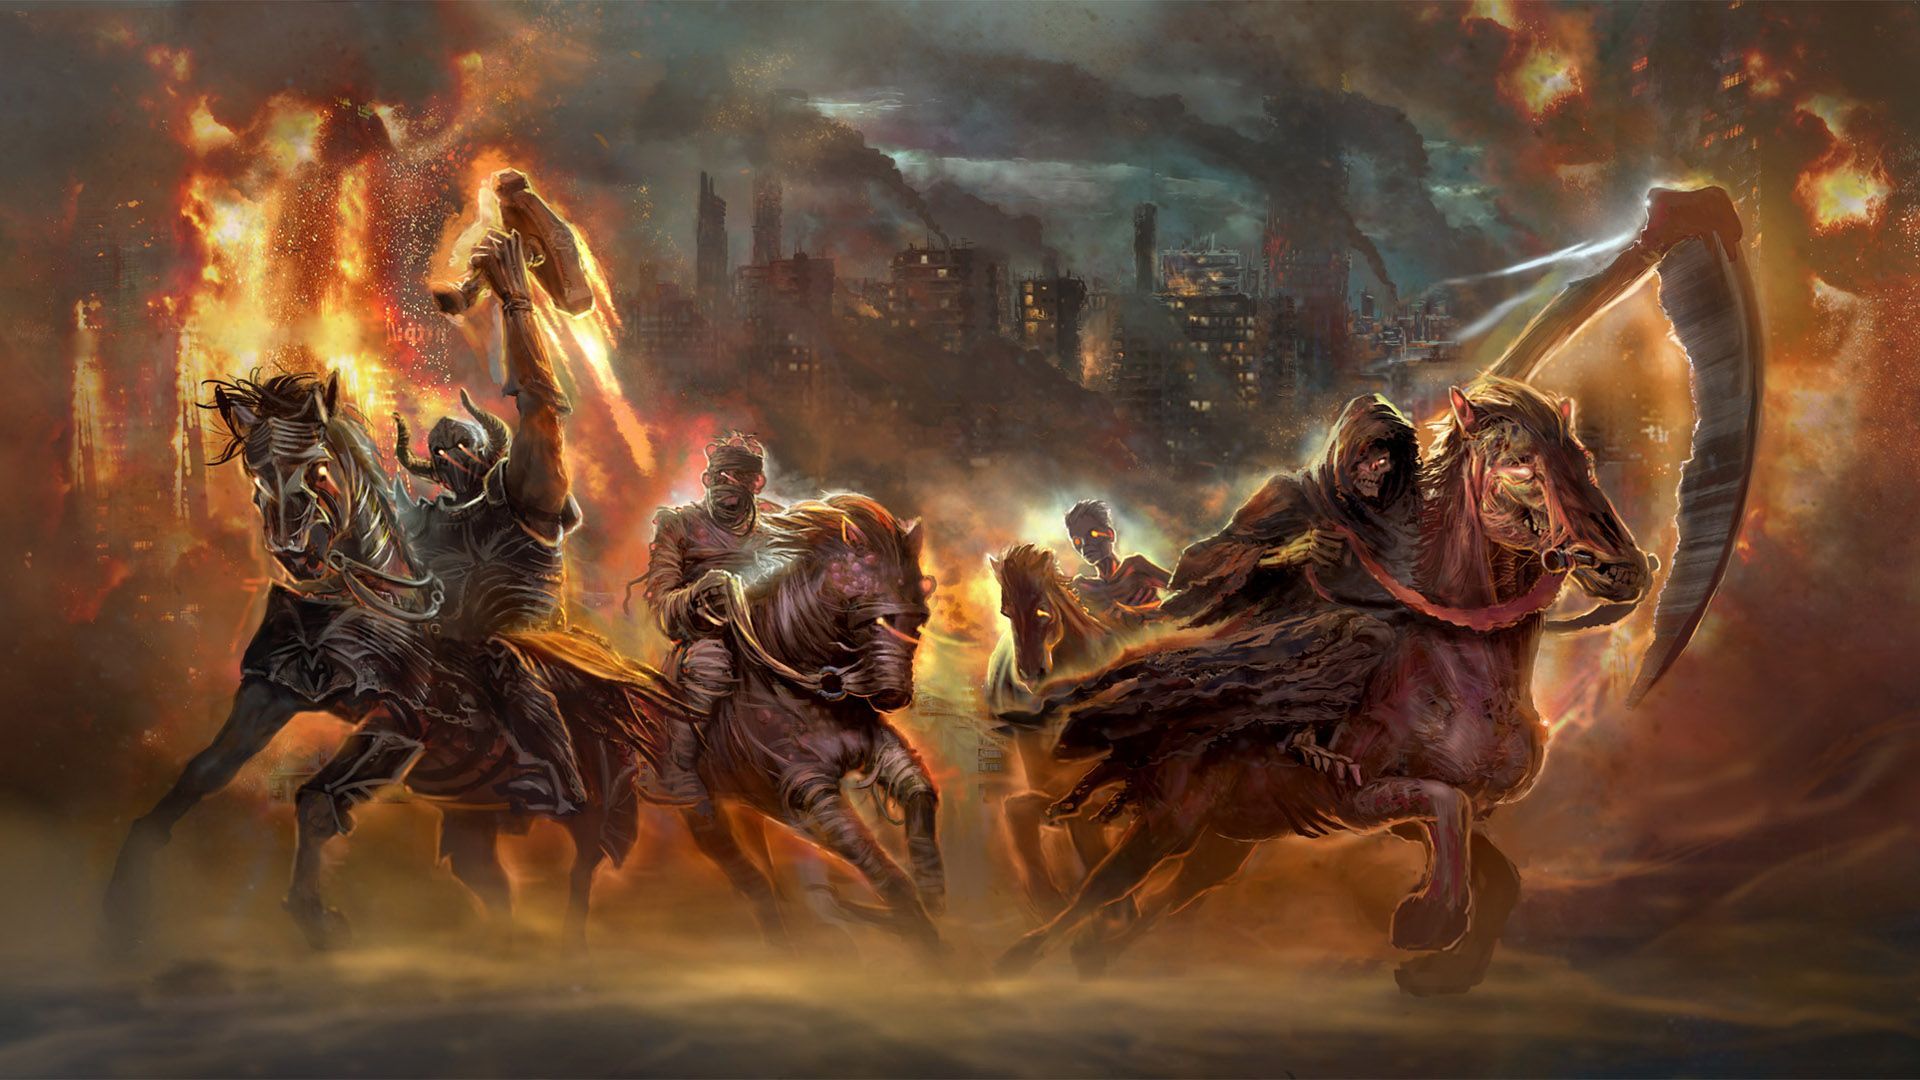 Four Horsemen Of The Apocalypse clipart #6, Download drawings